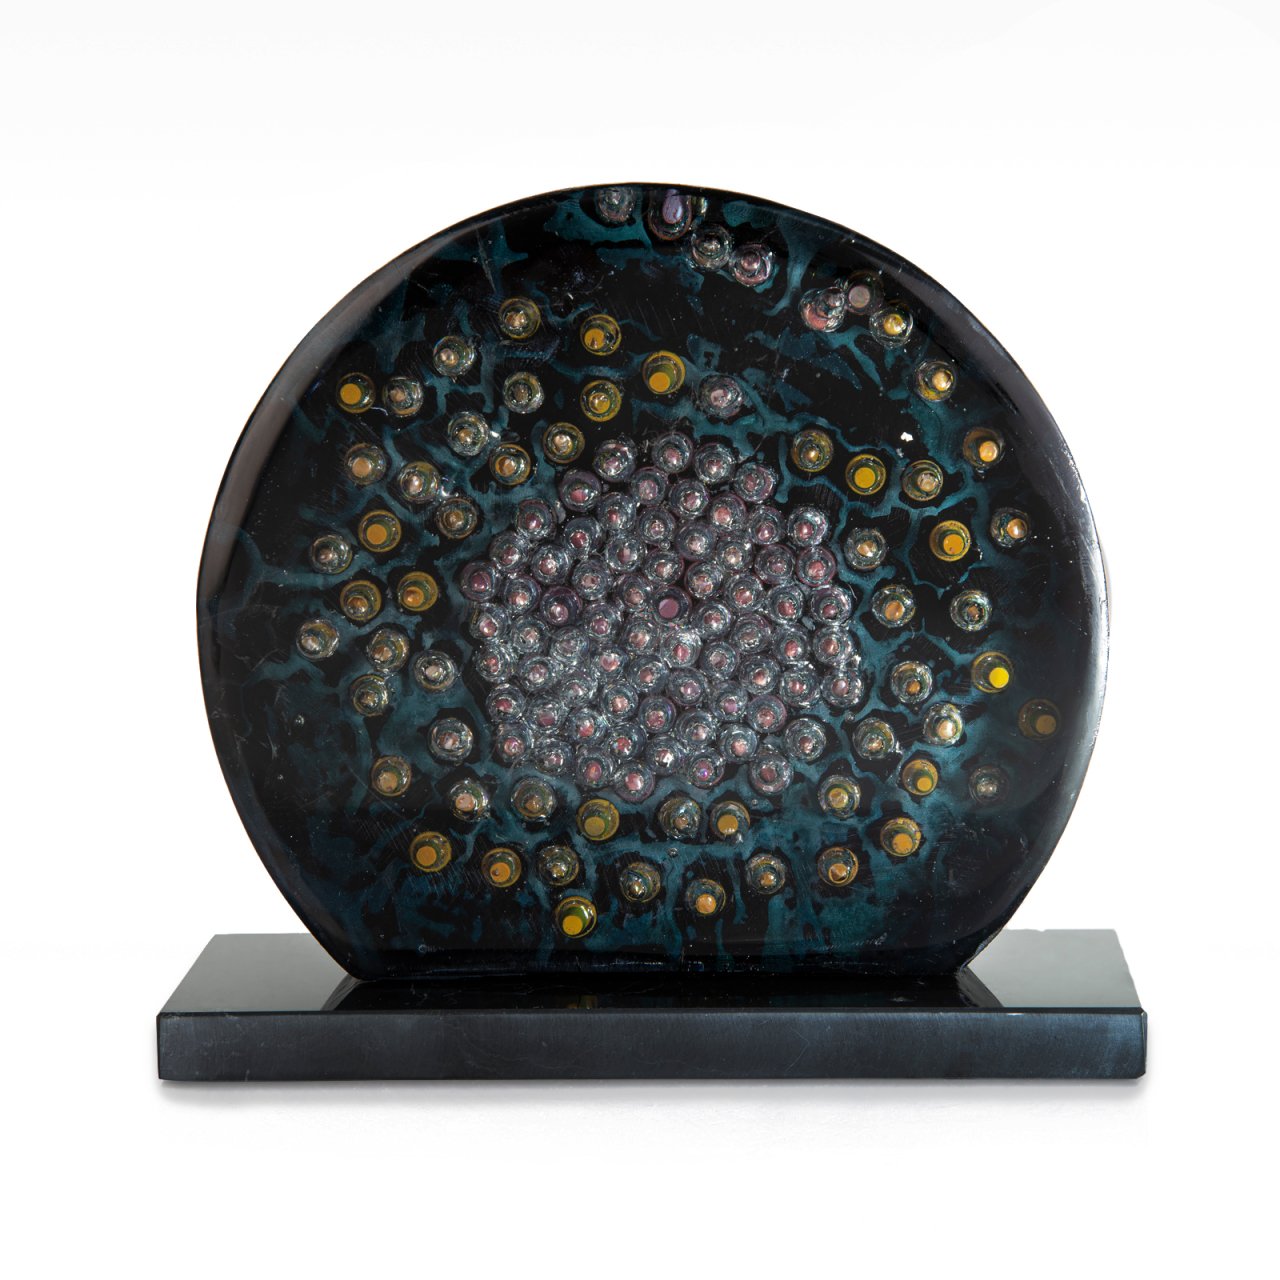 Glass Sculpture and Decorative Item - The colorful and mottled emptiness of the night